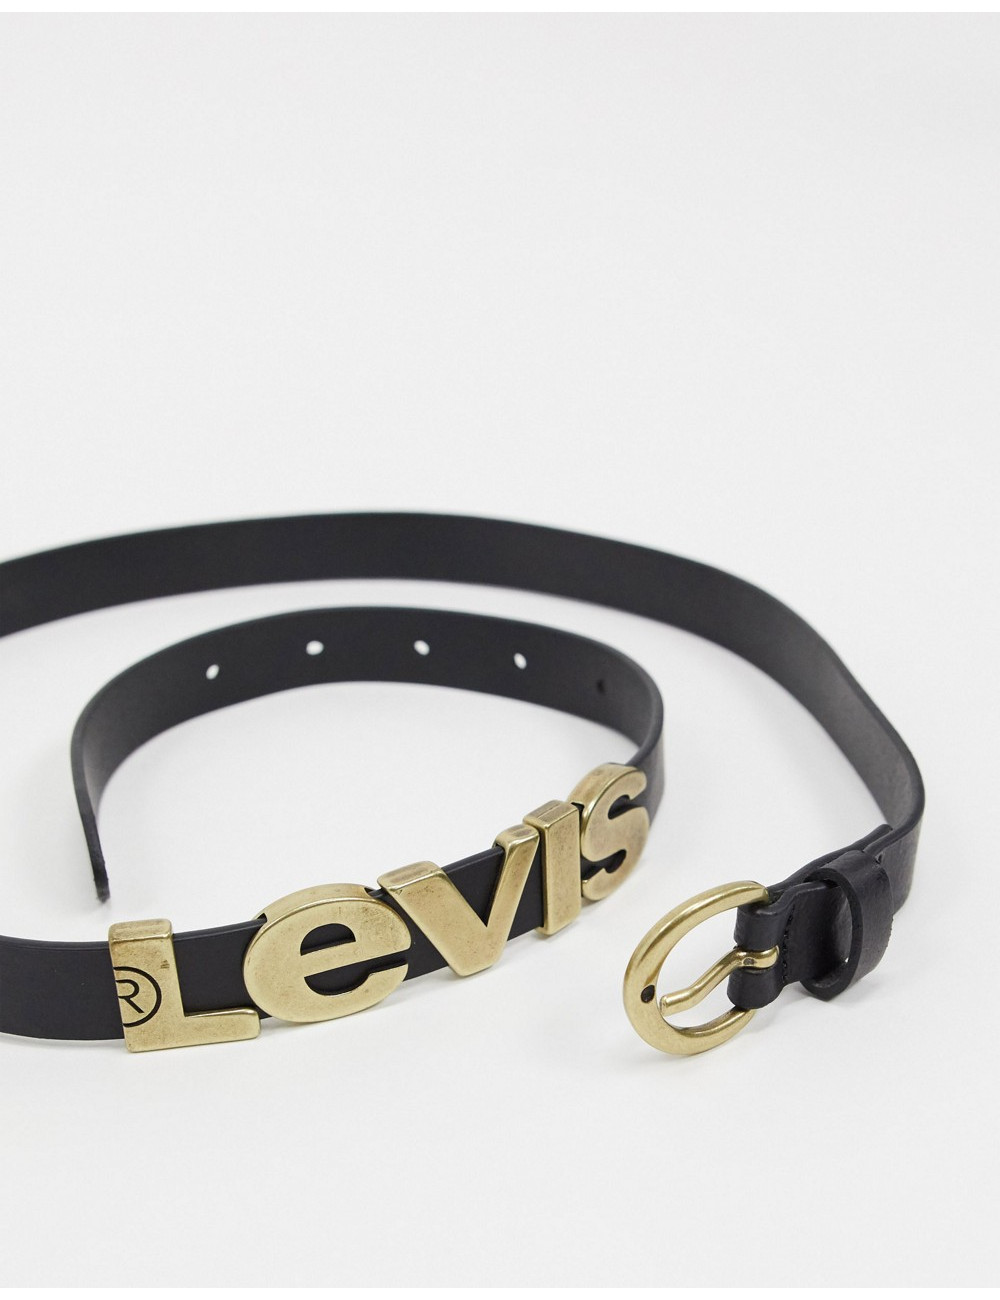 Levi's leather belt with...